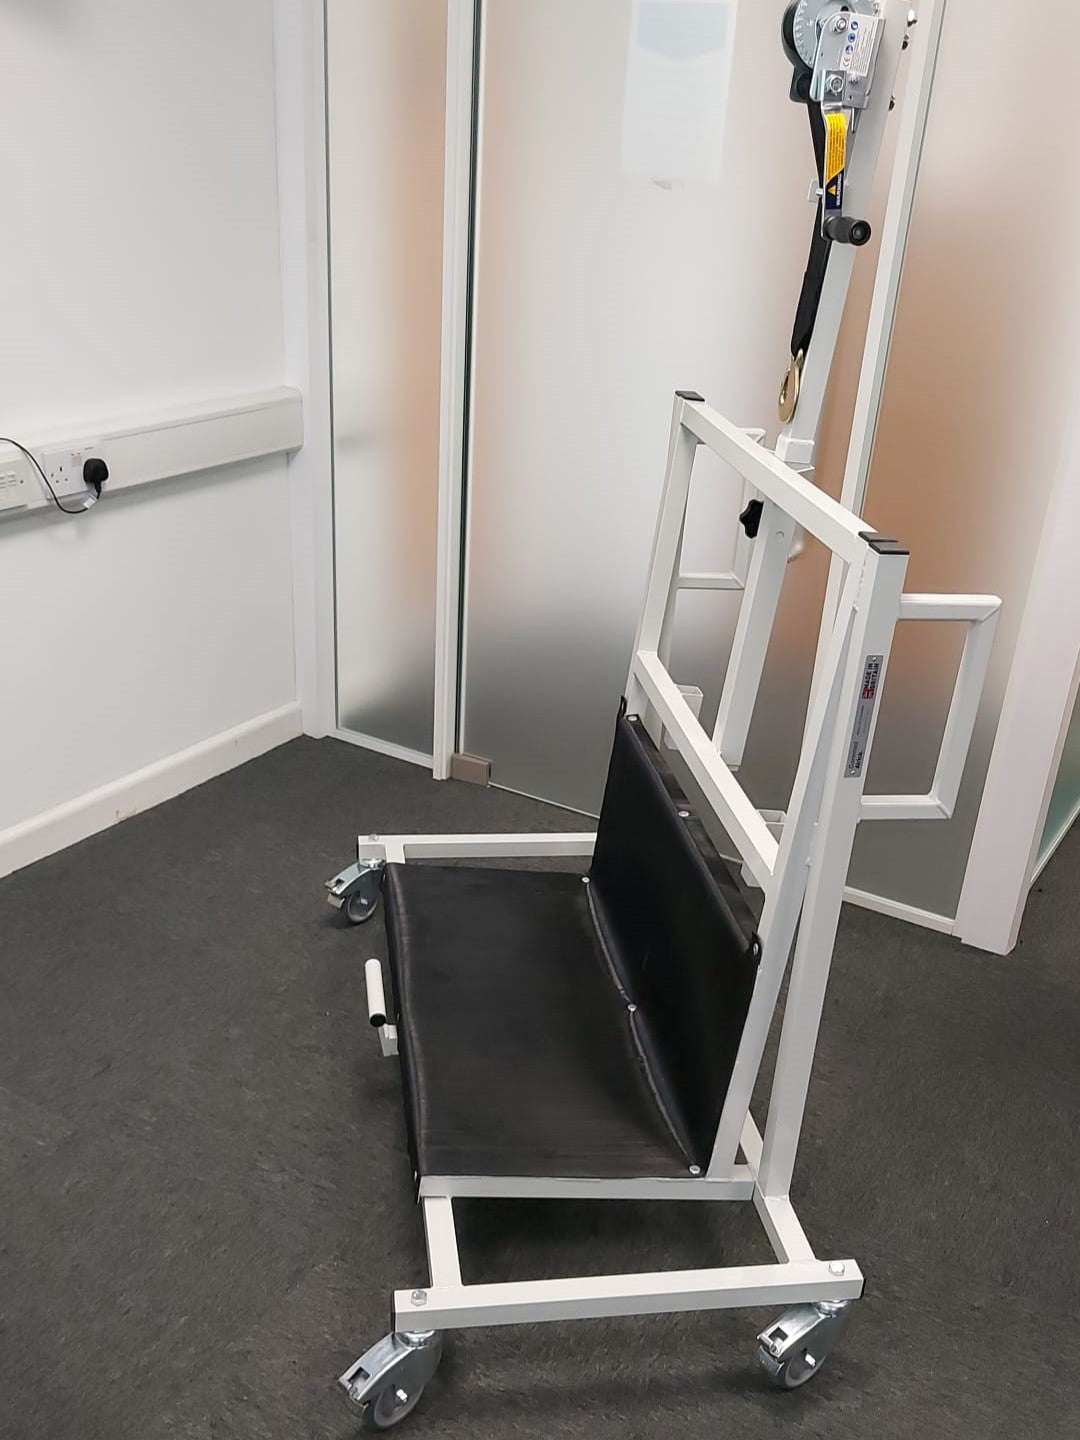 Save your back, make life easier with the bed mover trolley